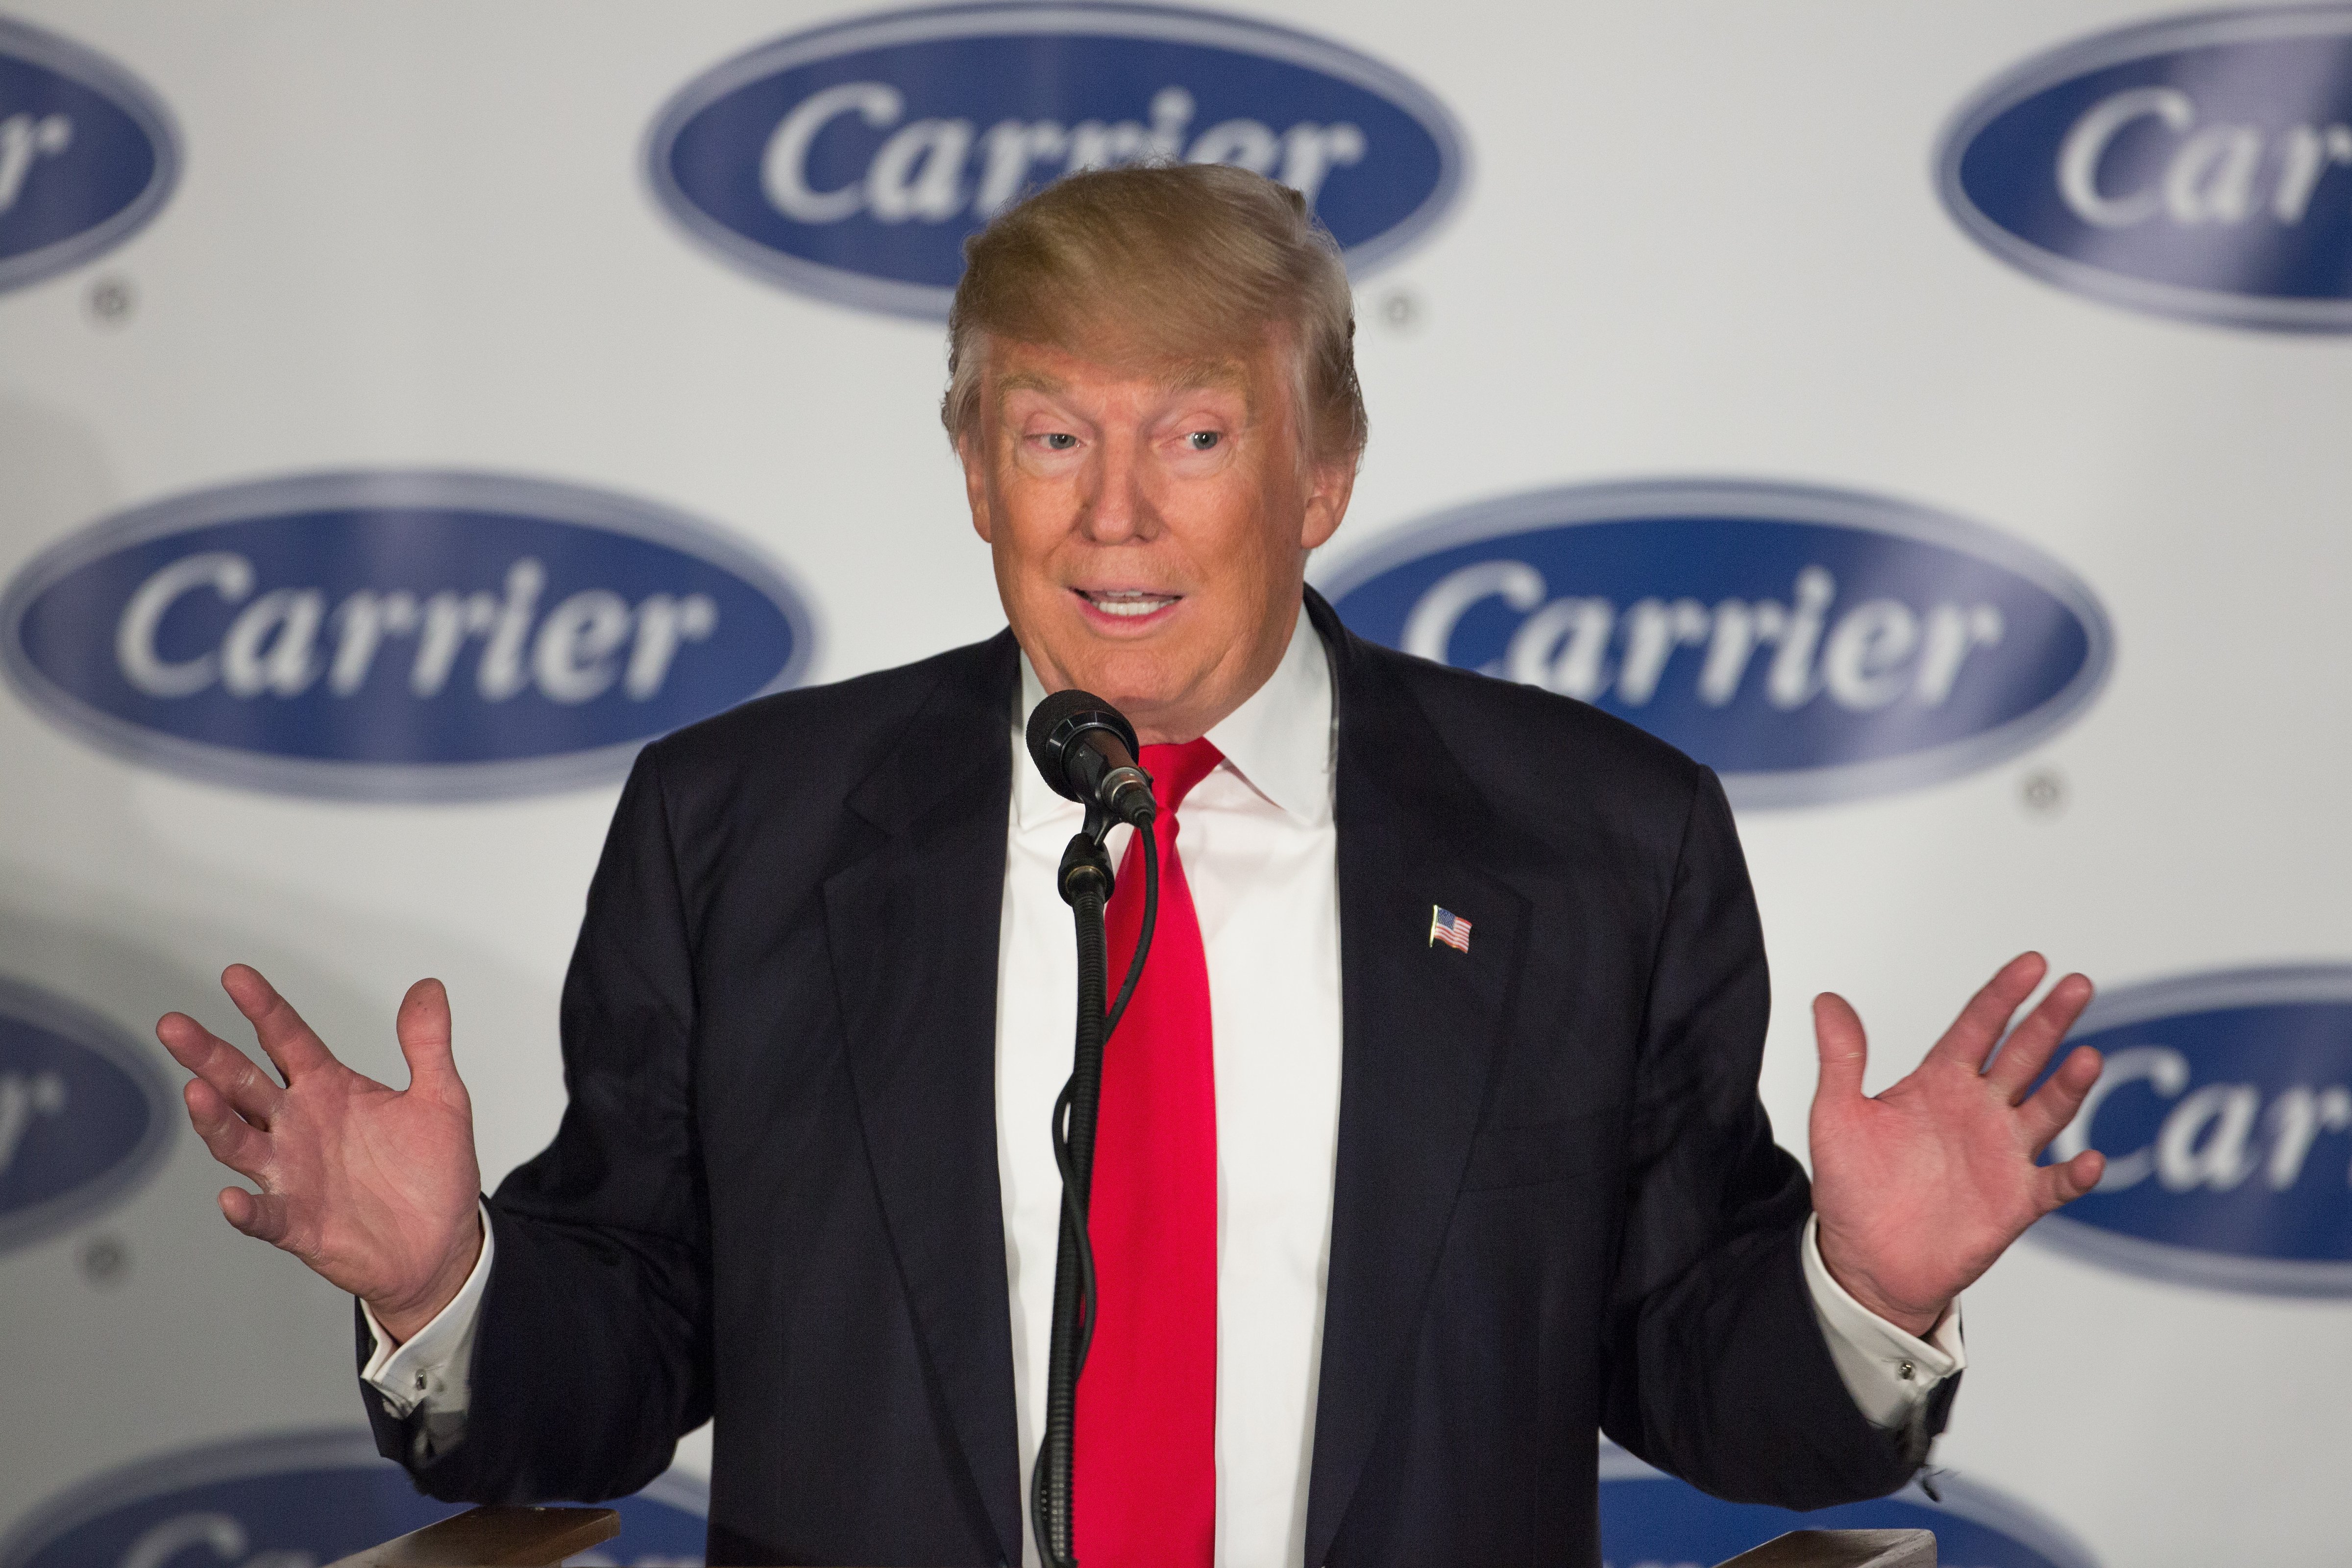 President-elect Donald Trump speaks to workers at Carrier air conditioning and heating on Dec. 1, 2016 in Indianapolis, Indiana. (Tasos Katopodis—Getty Images)